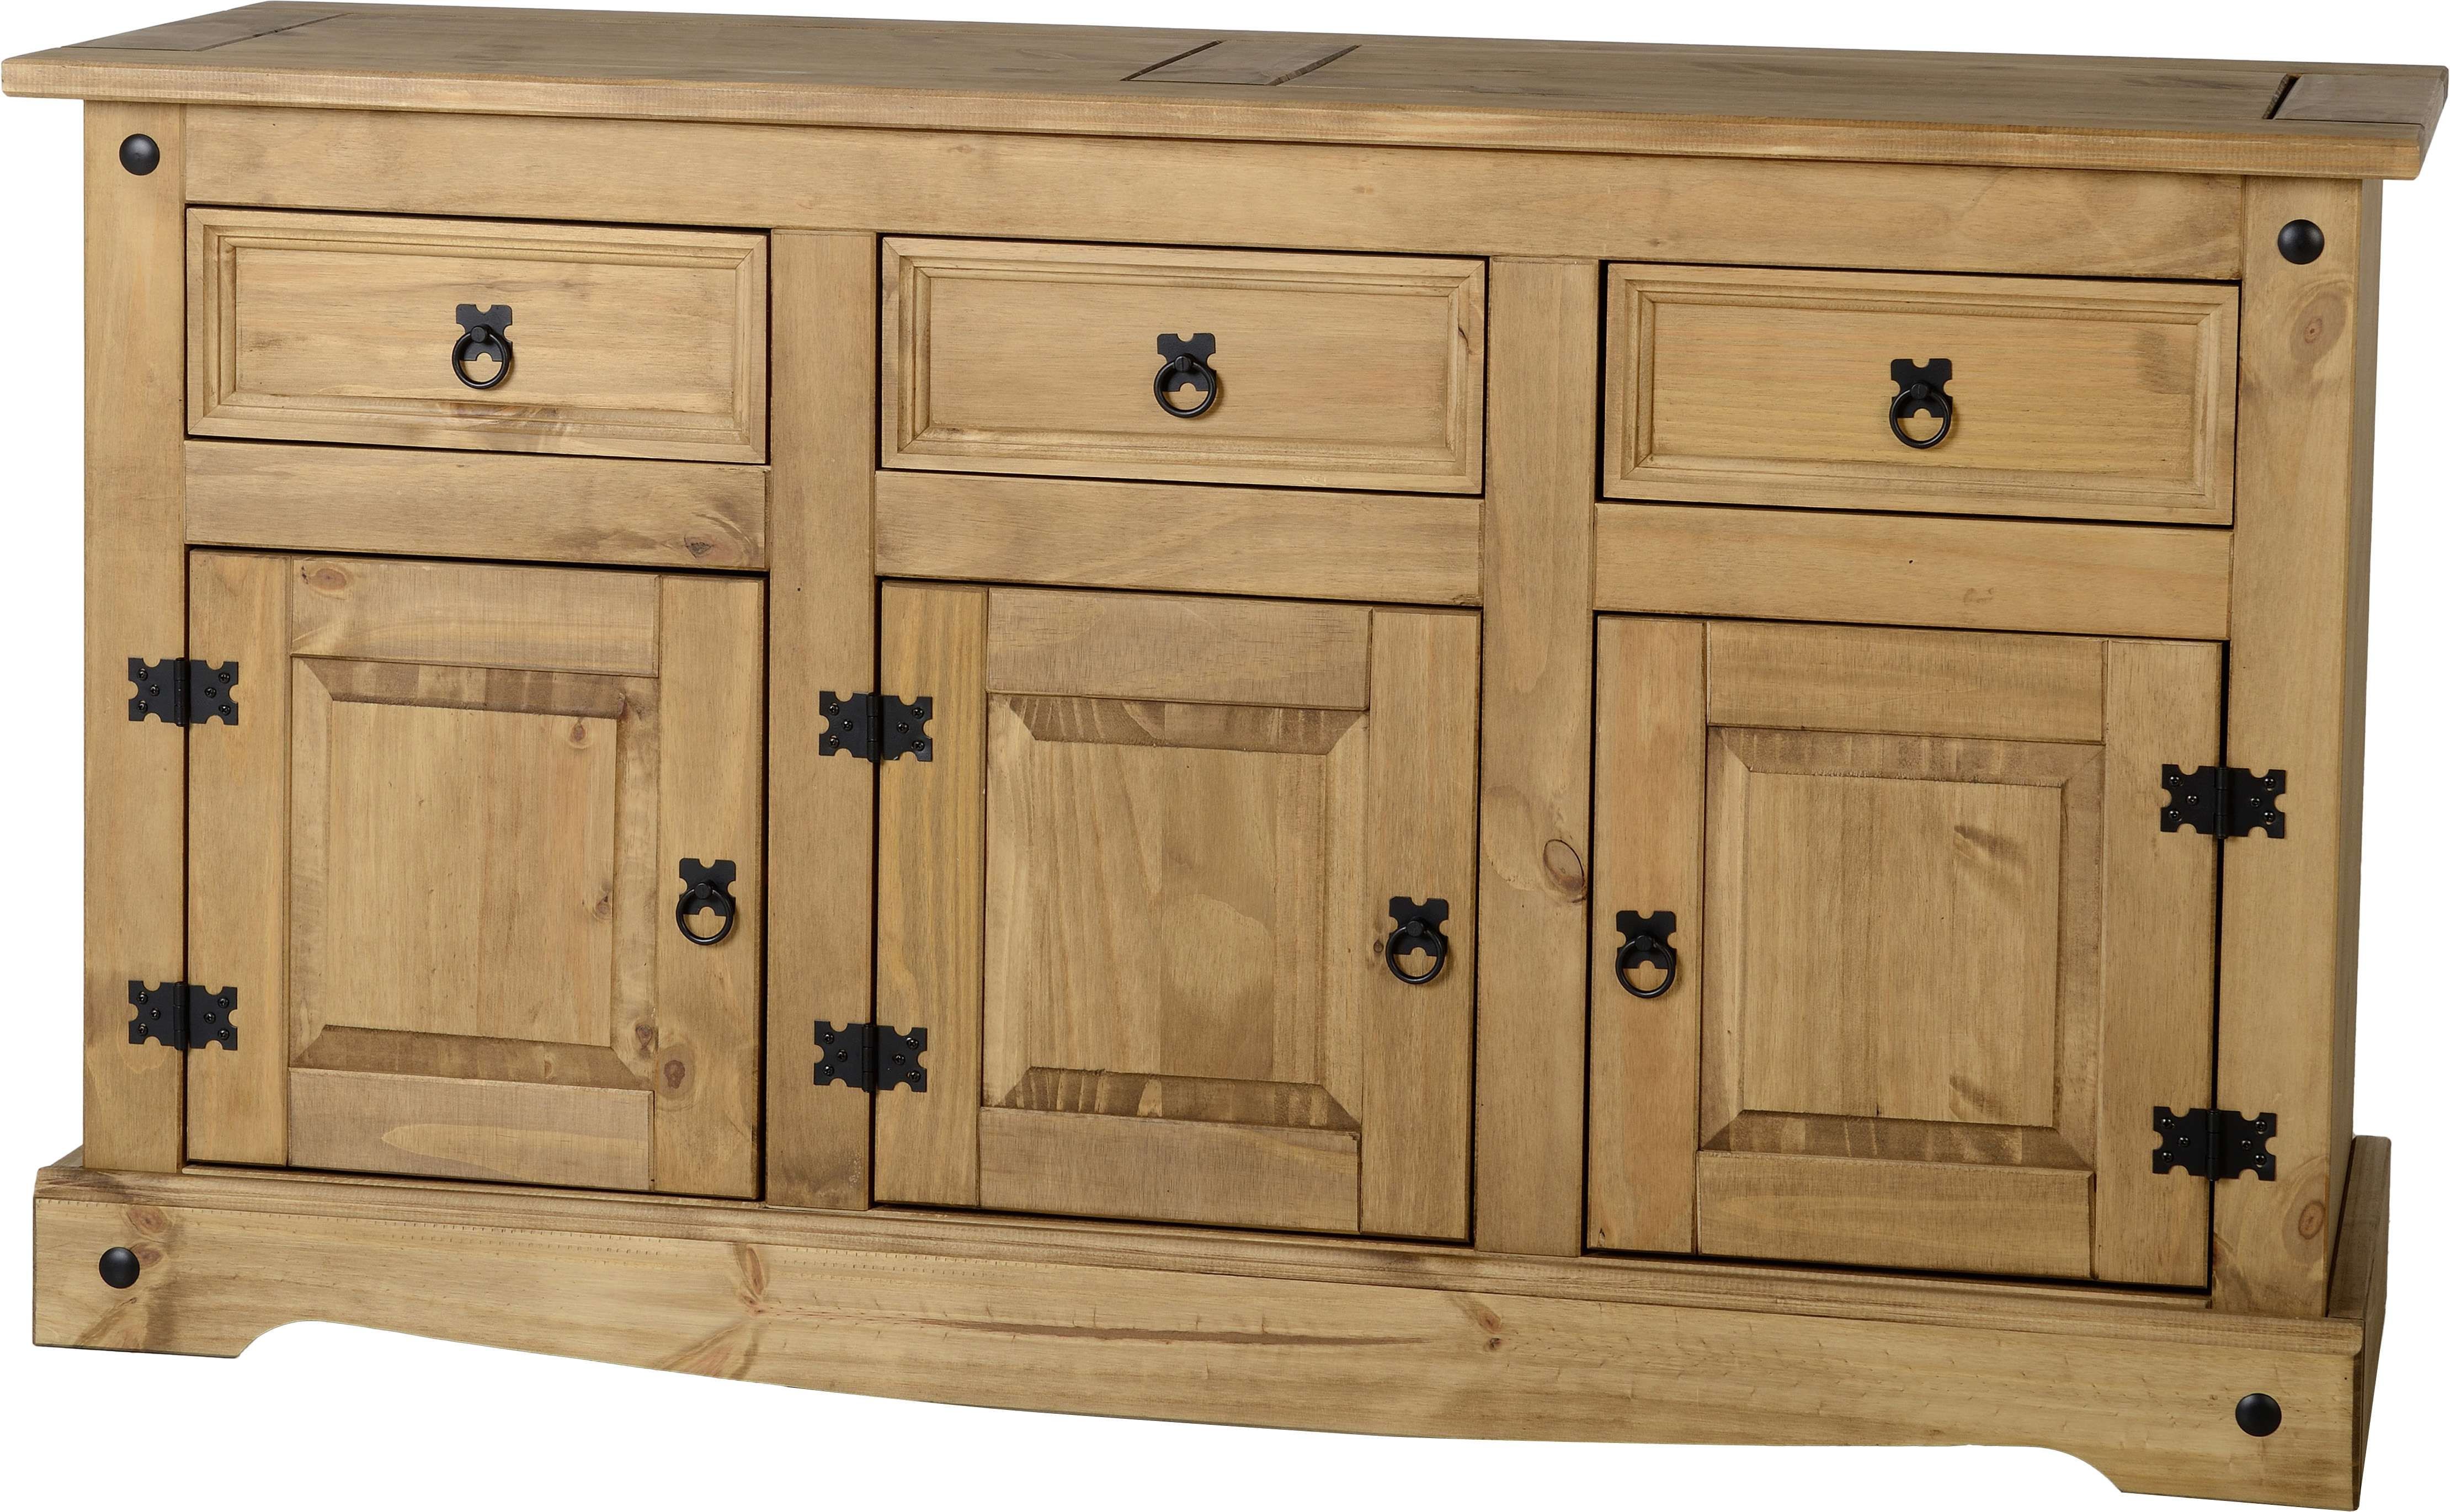 Corona Dining Room Furniture – Cherry Lane Garden Centre For Affinity Sideboards (View 12 of 20)